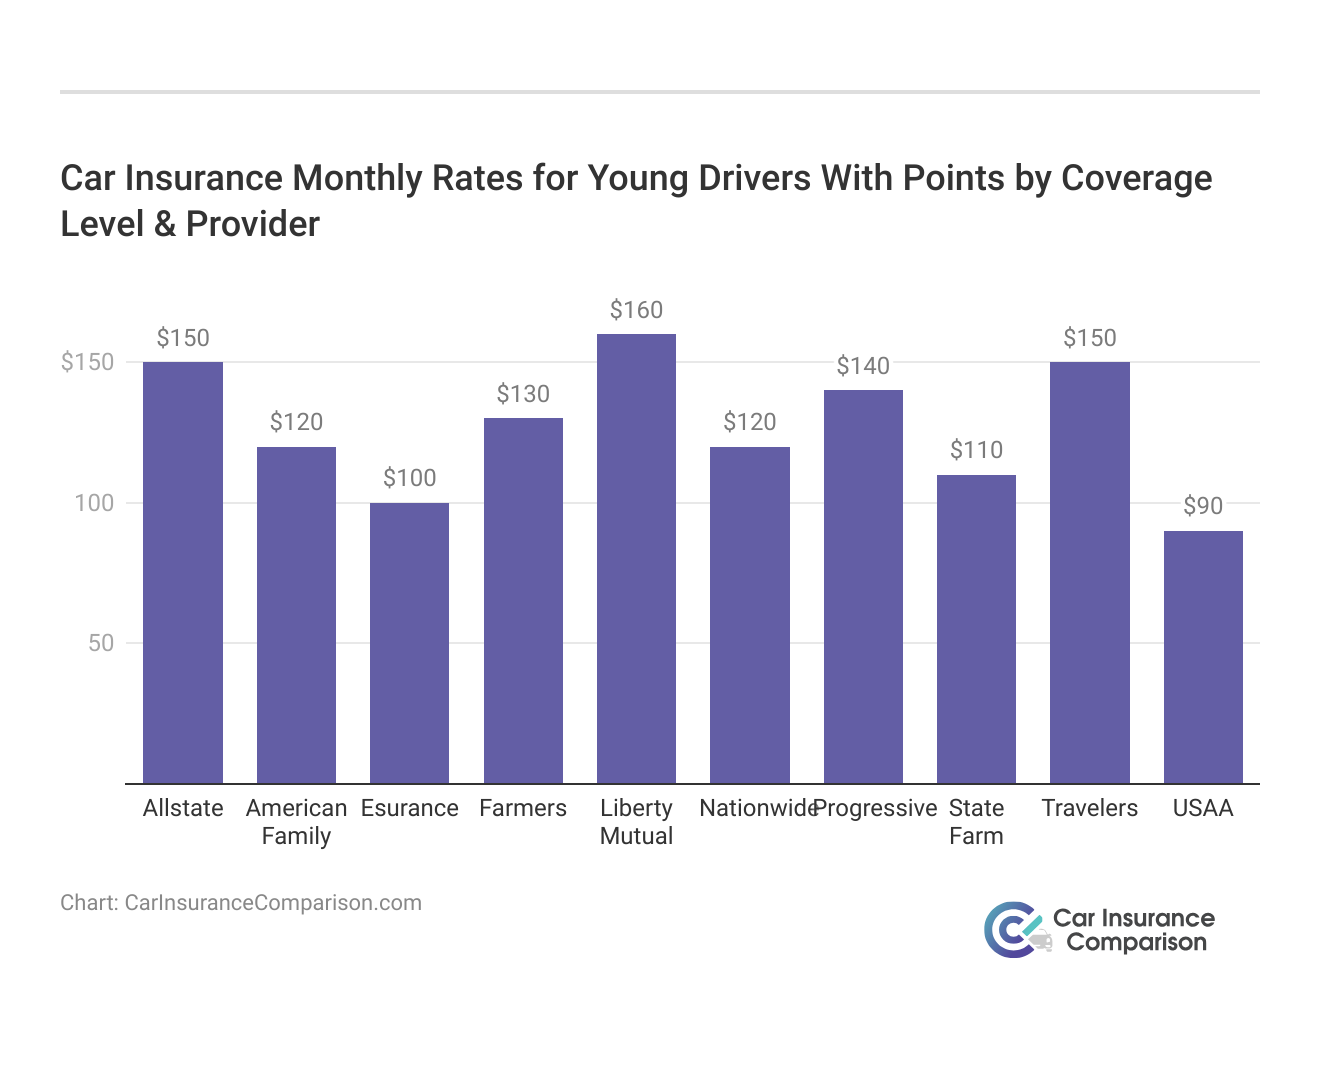 <h3>Car Insurance Monthly Rates for Young Drivers With Points by Coverage Level & Provider</h3>